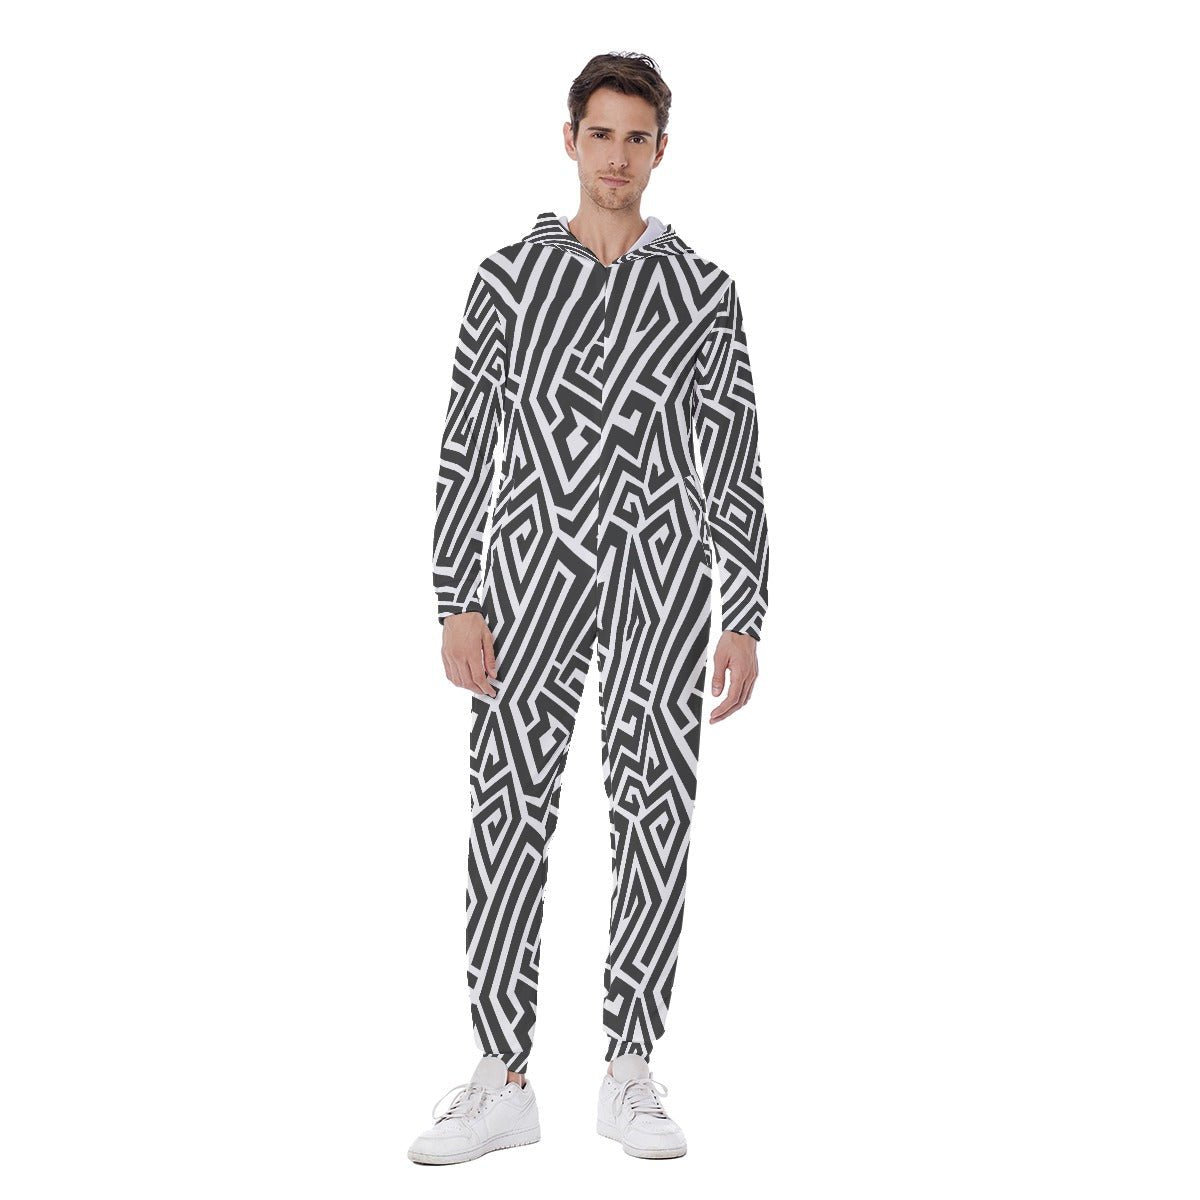 DQM - Zig Zag Pattern Hooded Jumpsuit - dragqueenmerch